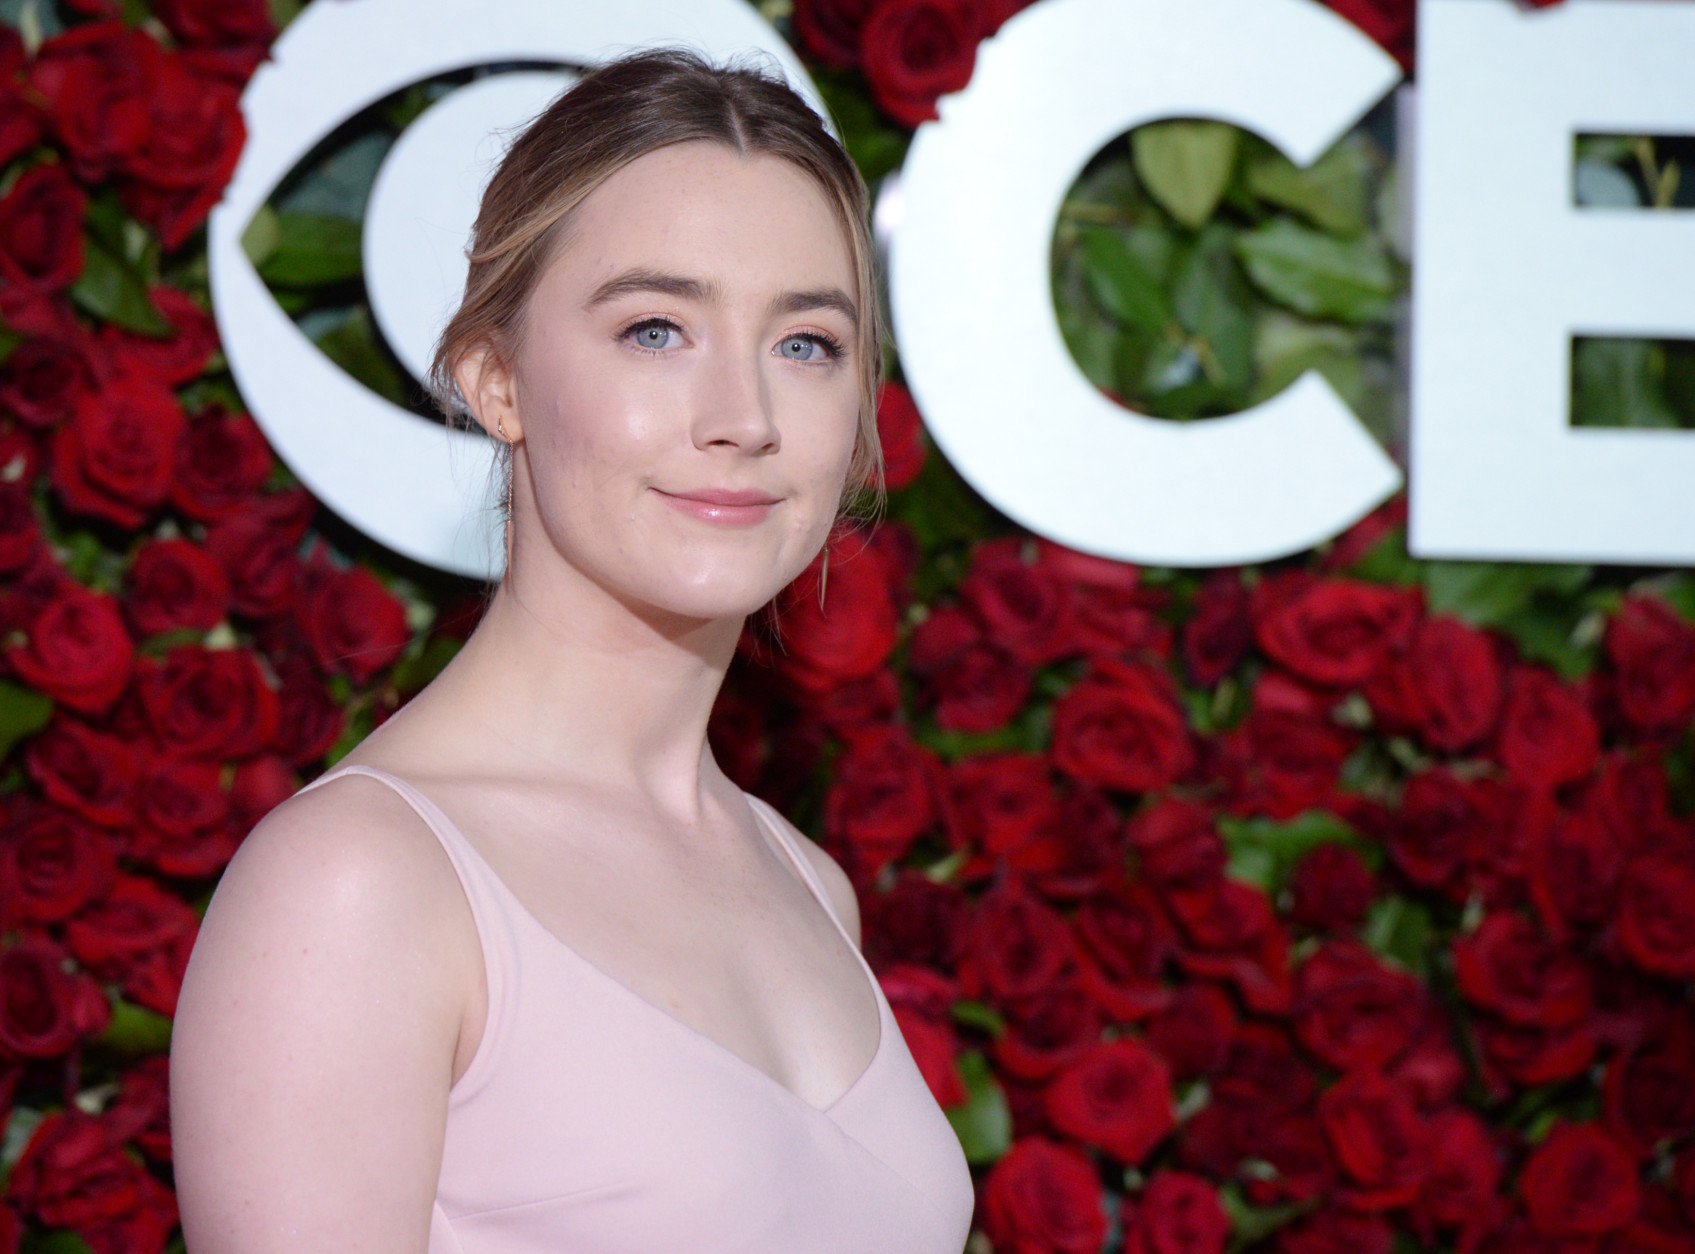 Saoirse Ronan arrives at the Tony Awards at the Beacon Theatre on Sunday, June 12, 2016, in New York. (Photo by Charles Sykes/Invision/AP)